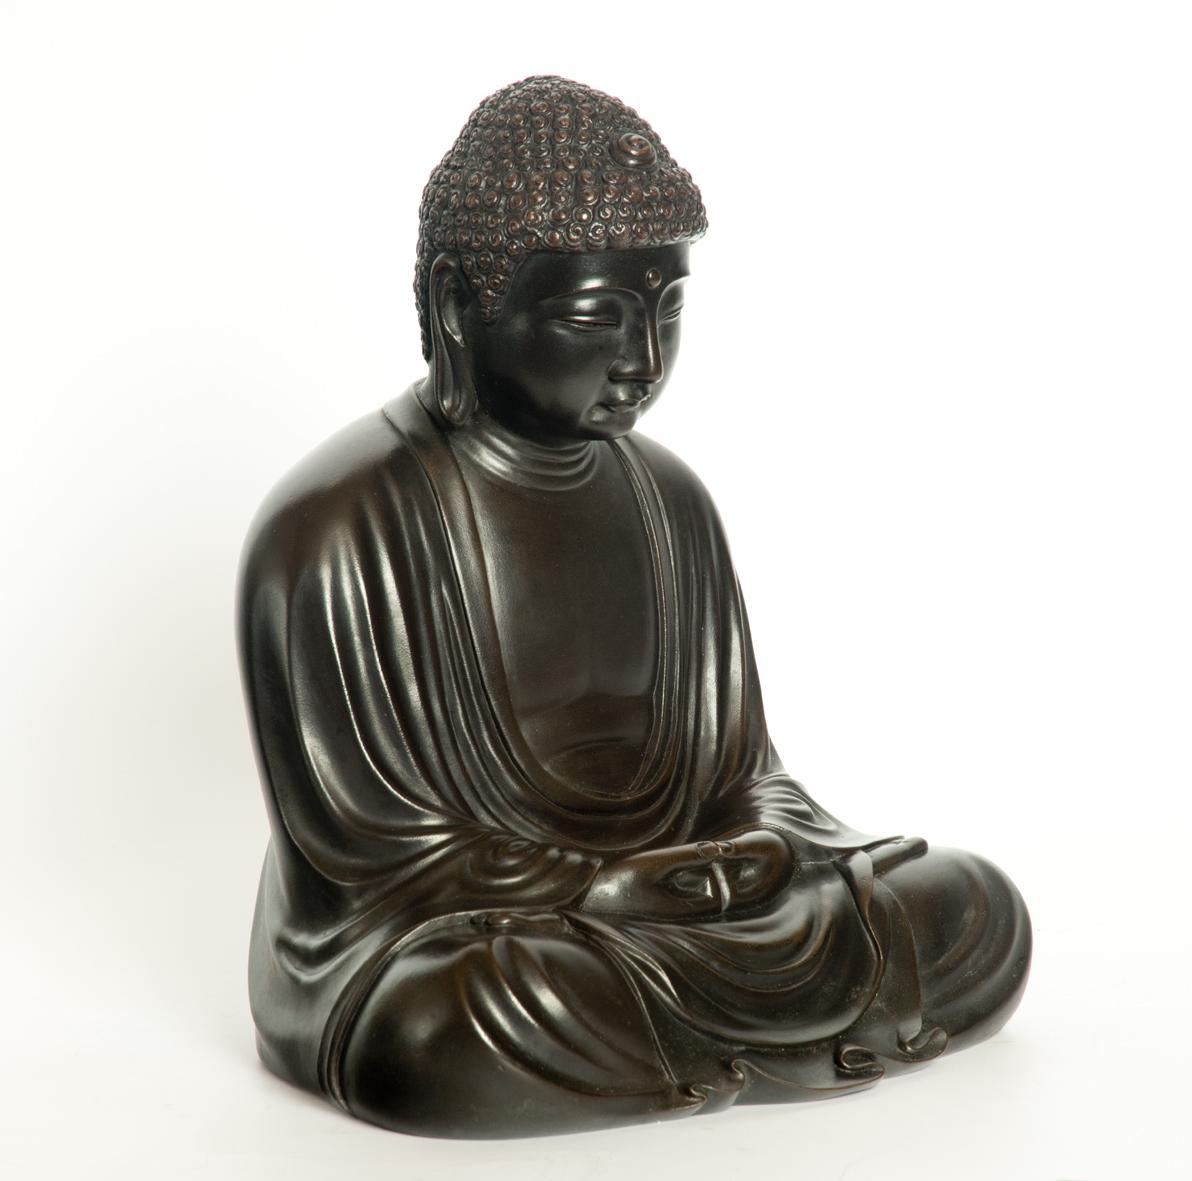 As part of our Japanese works of art collection we are delighted to offer this Meiji Period 1868-1912, finely rendered bronze study of the great Buddha at the Kotoku-in at Kamakura, a most enchanting okimono of this iconic statue simply robed and